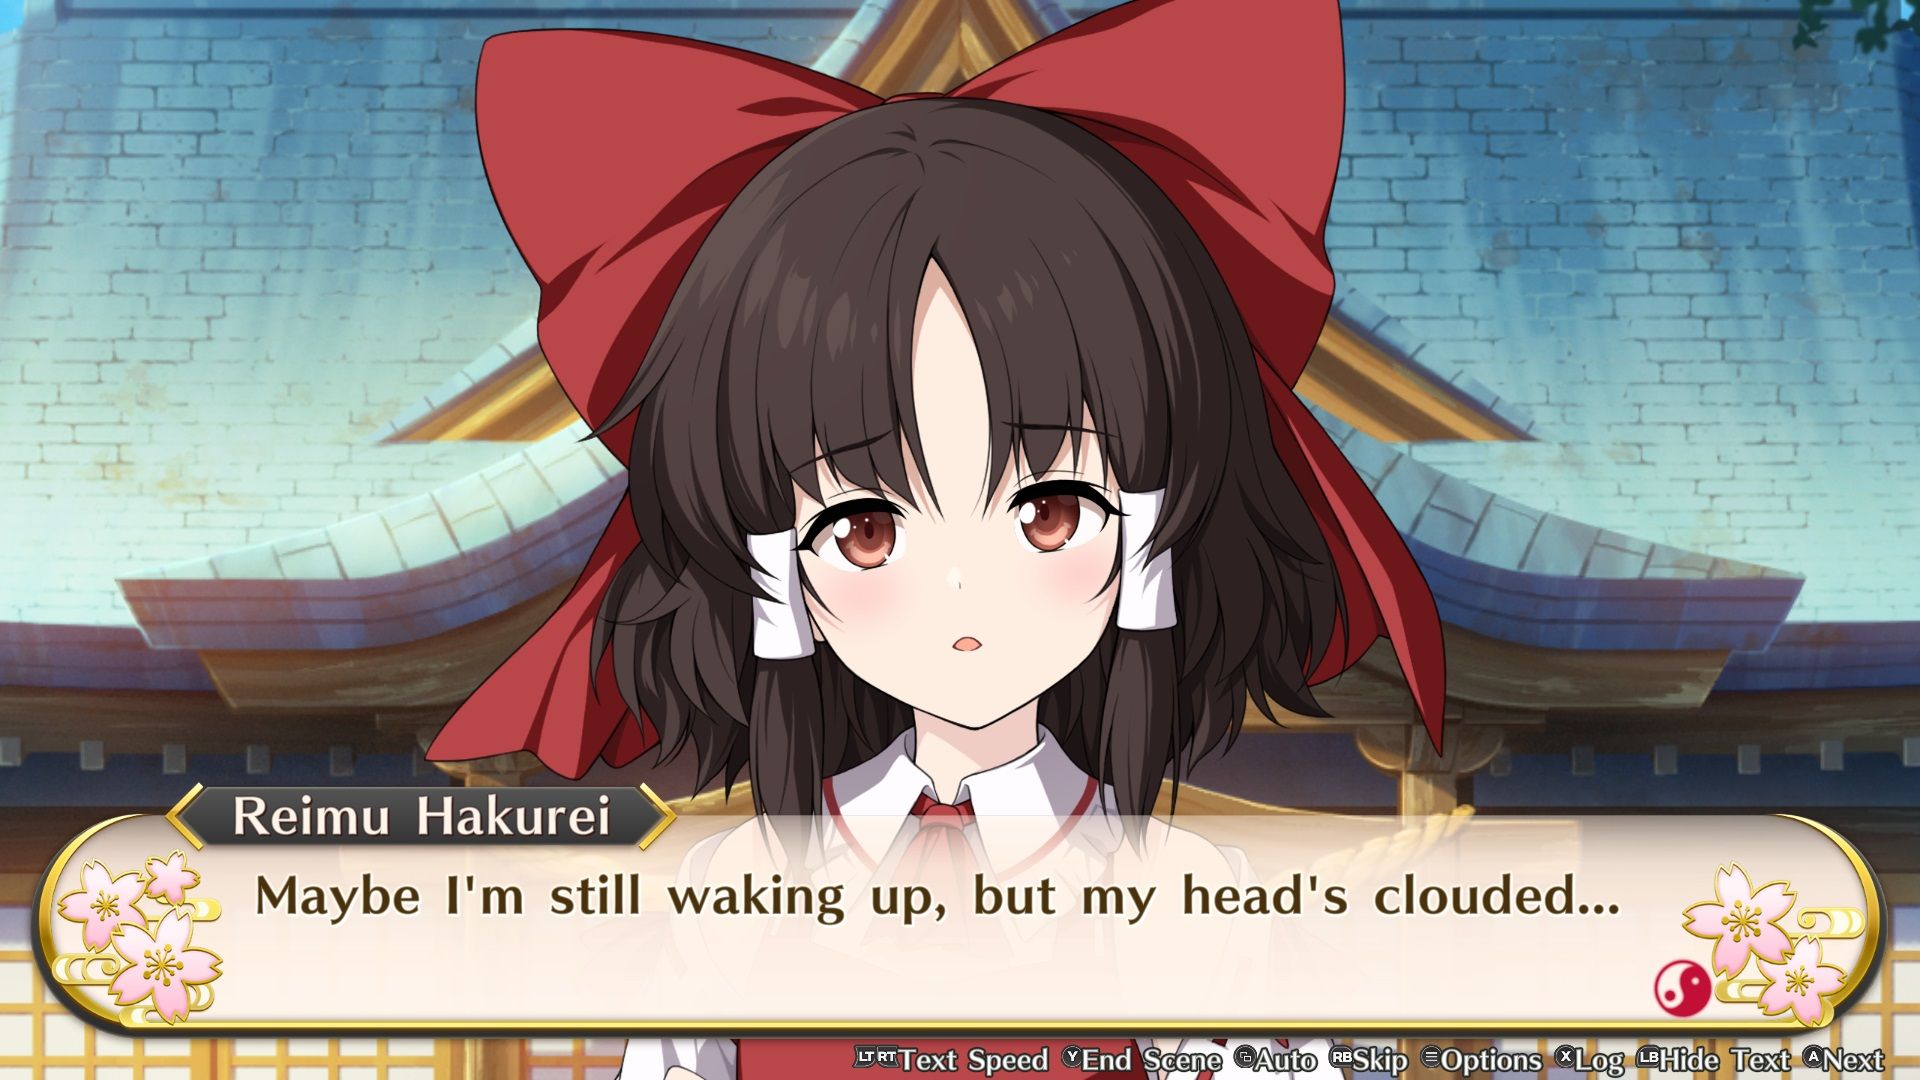 Reimu Hakurei thinking about her head being cloudy in Touhou Genso Wanderer -FORESIGHT-.